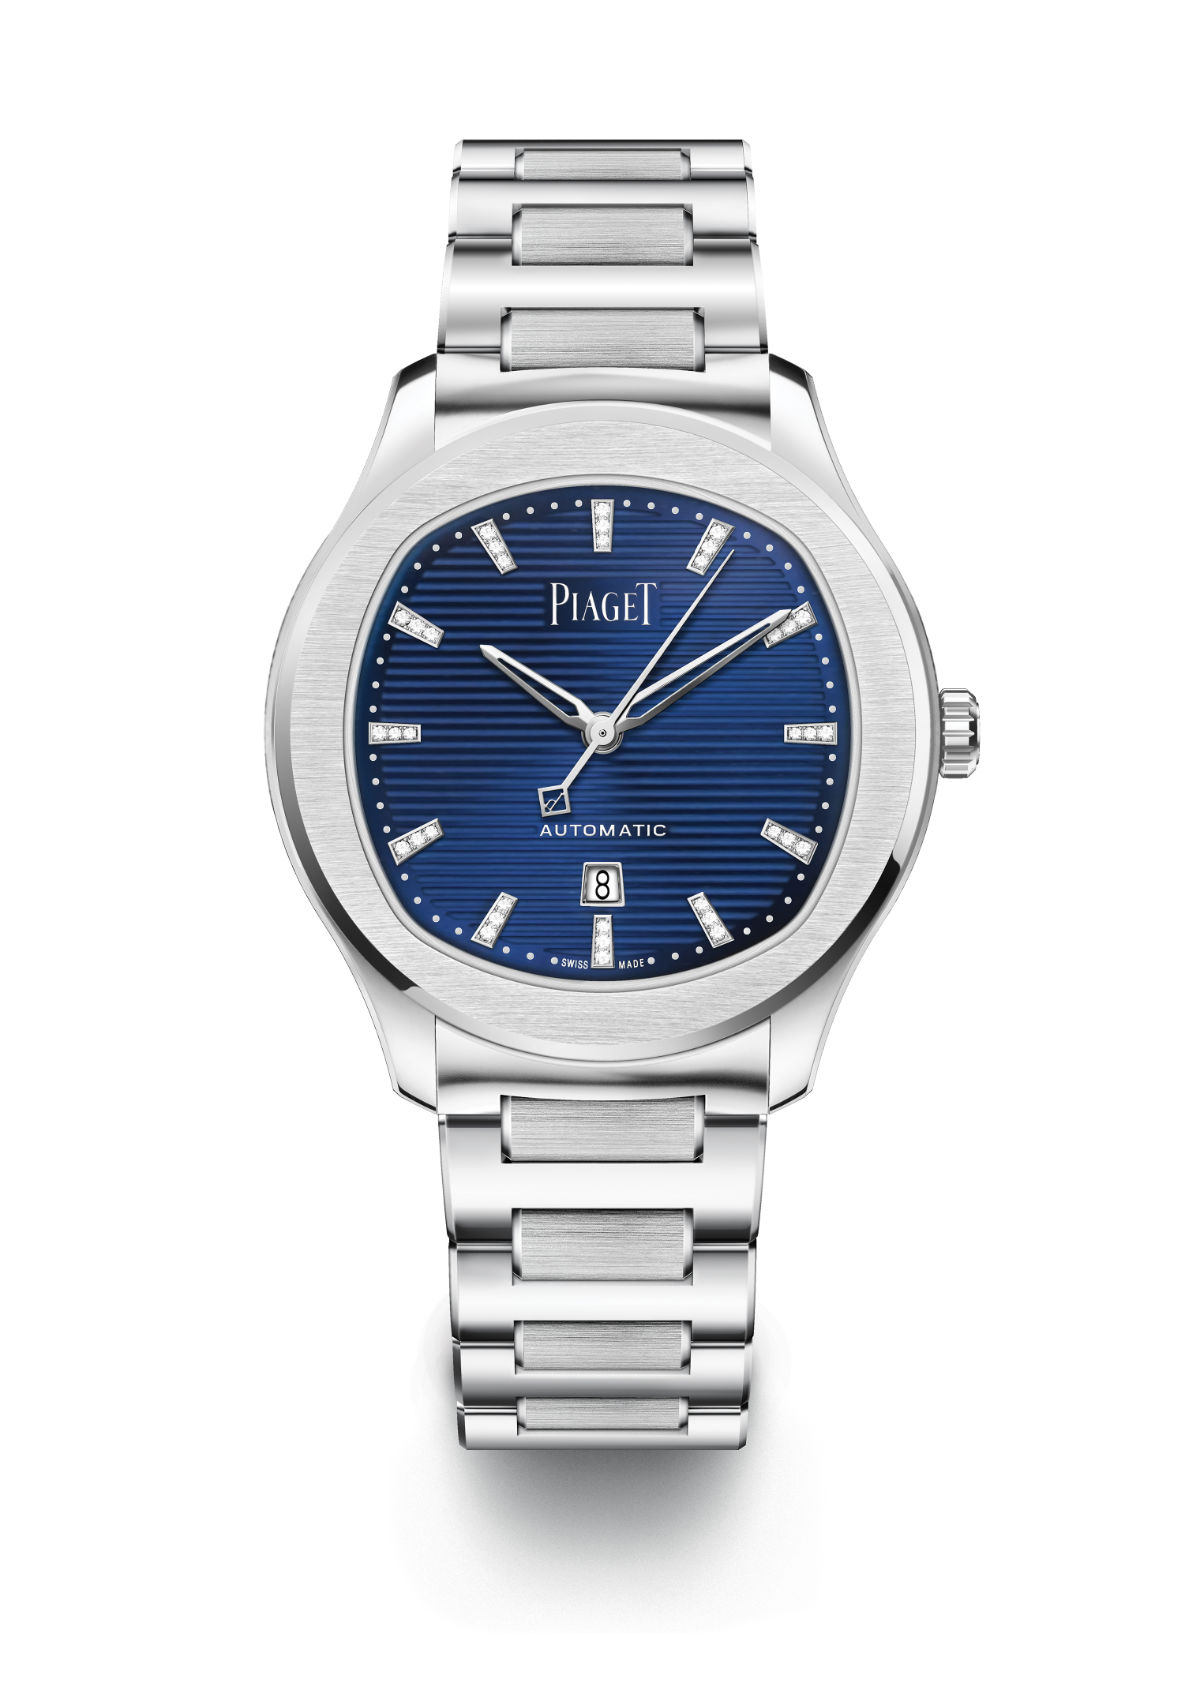 Piaget Welcomes The New Piaget Polo Date In 36mm